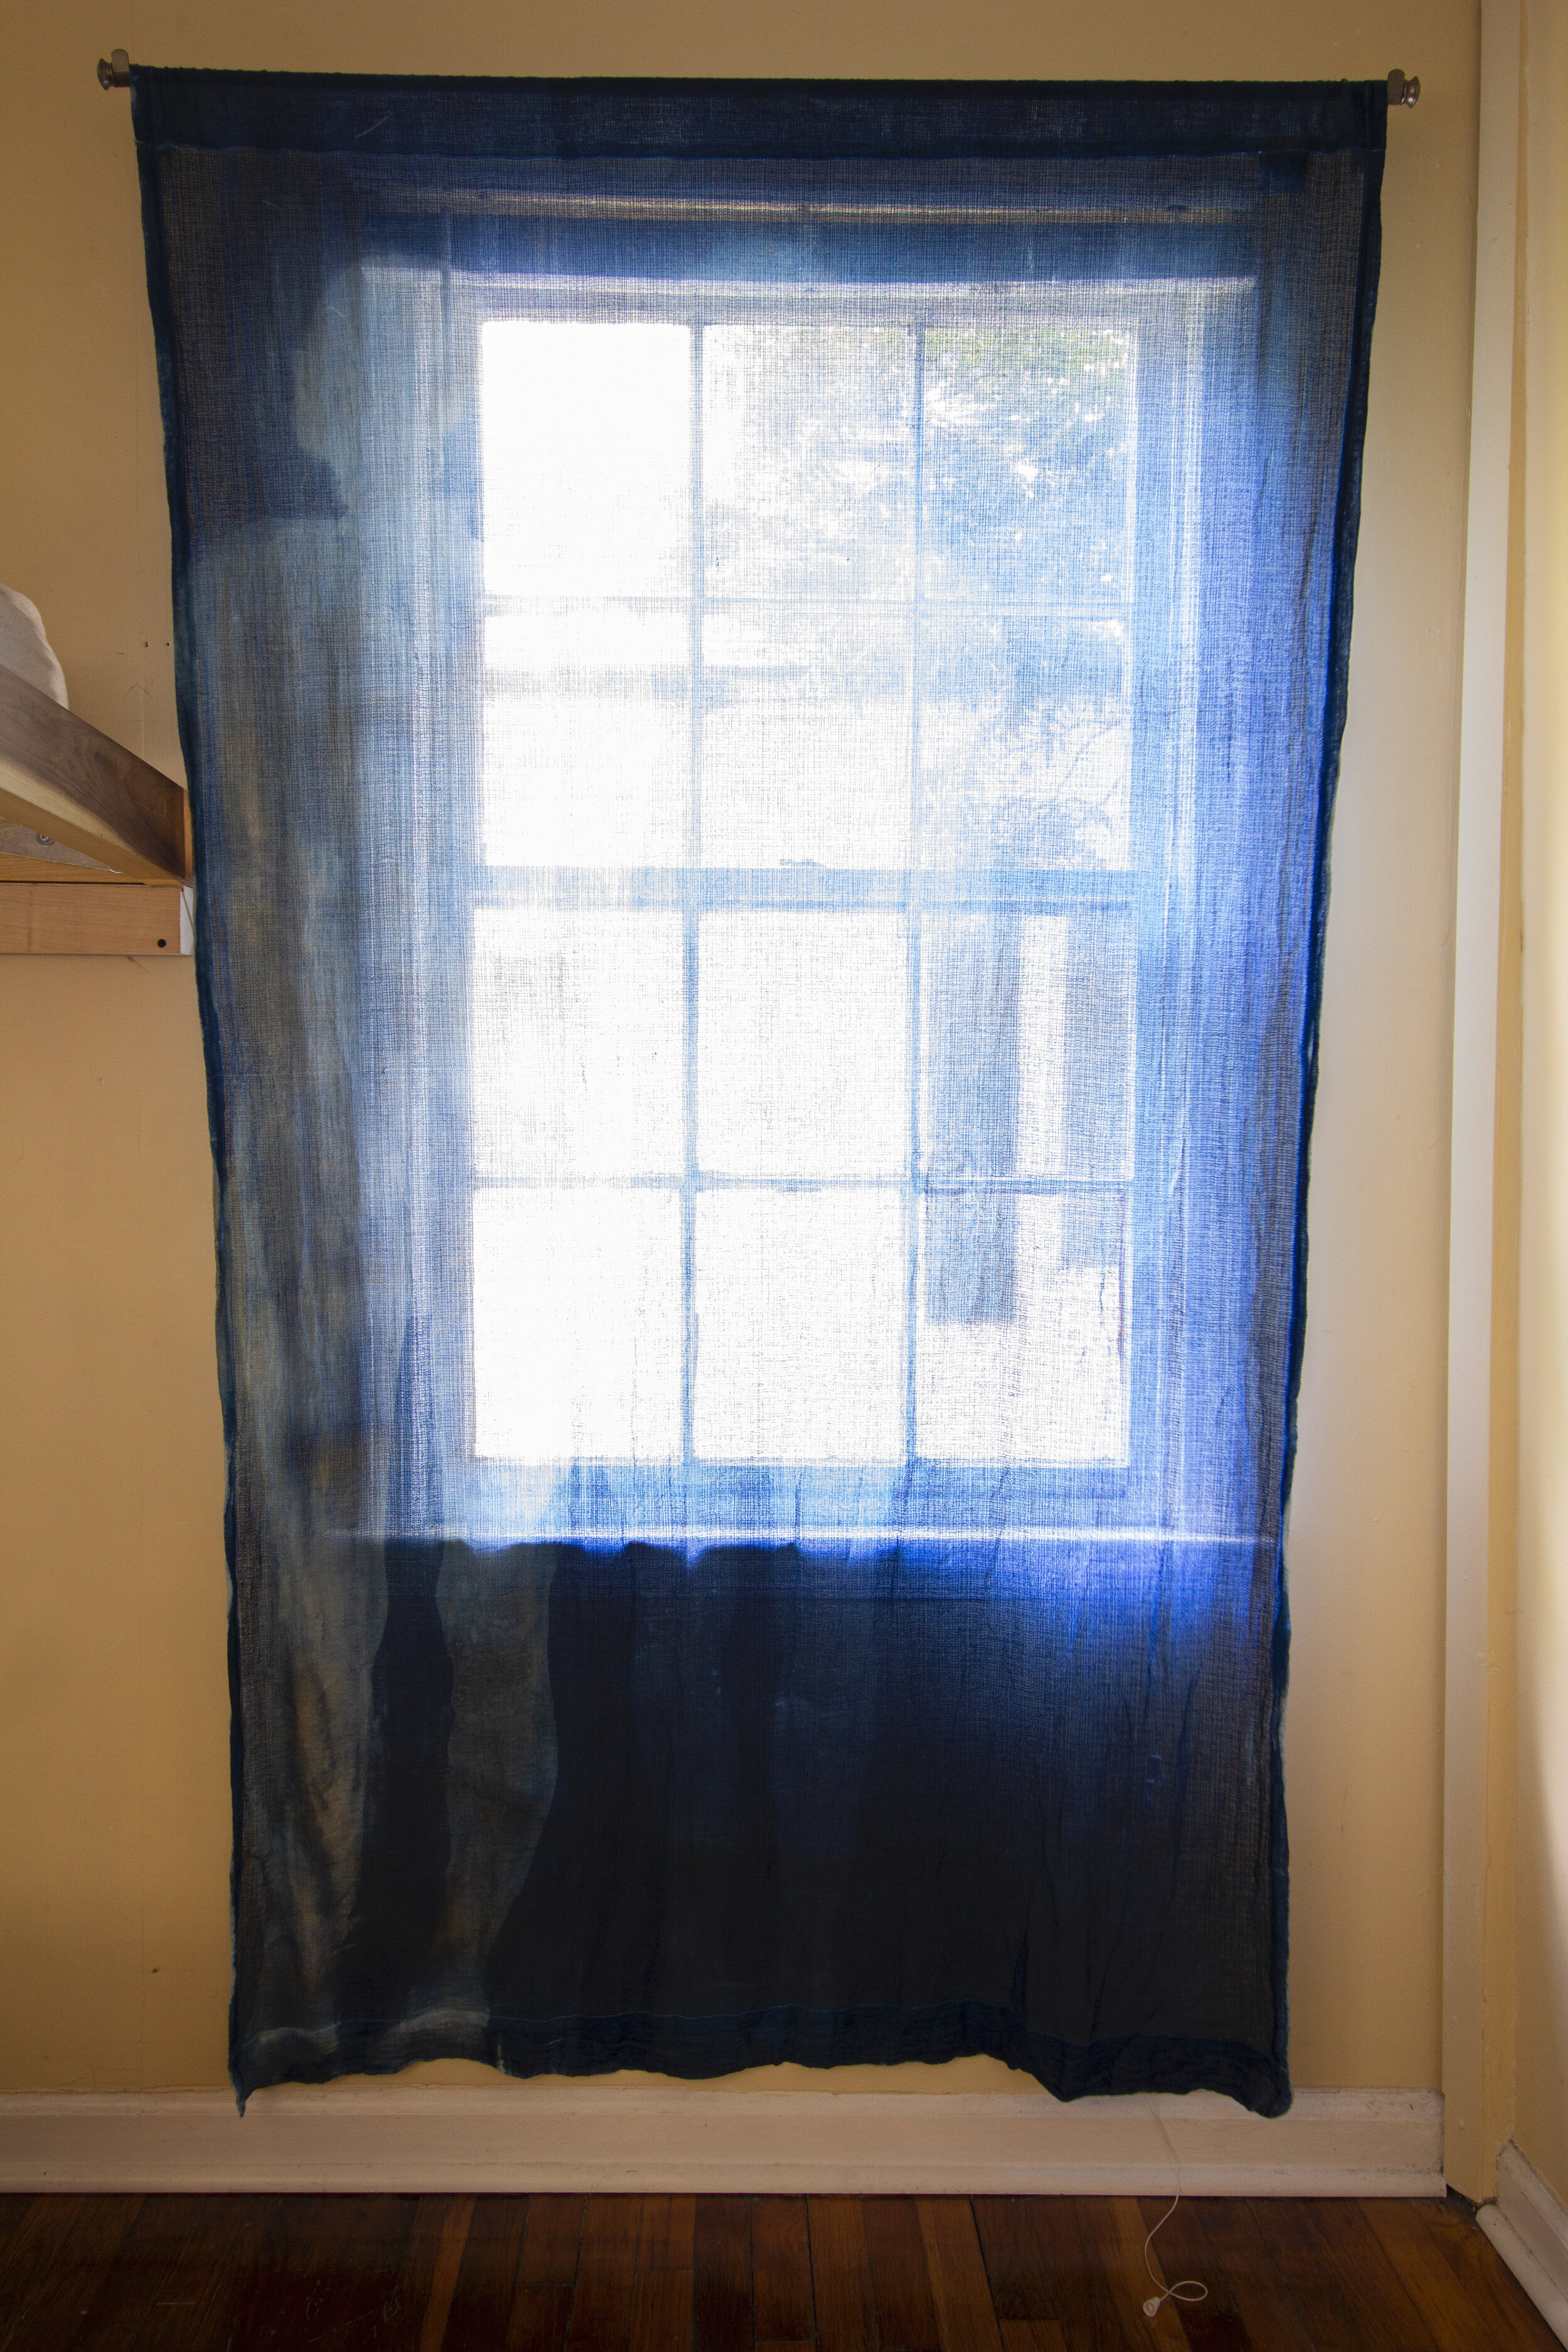  Unfolding [midday], 2020, cotton curtain, cyanotype solution, curtain rod, and hardware, 55 x 84 inches